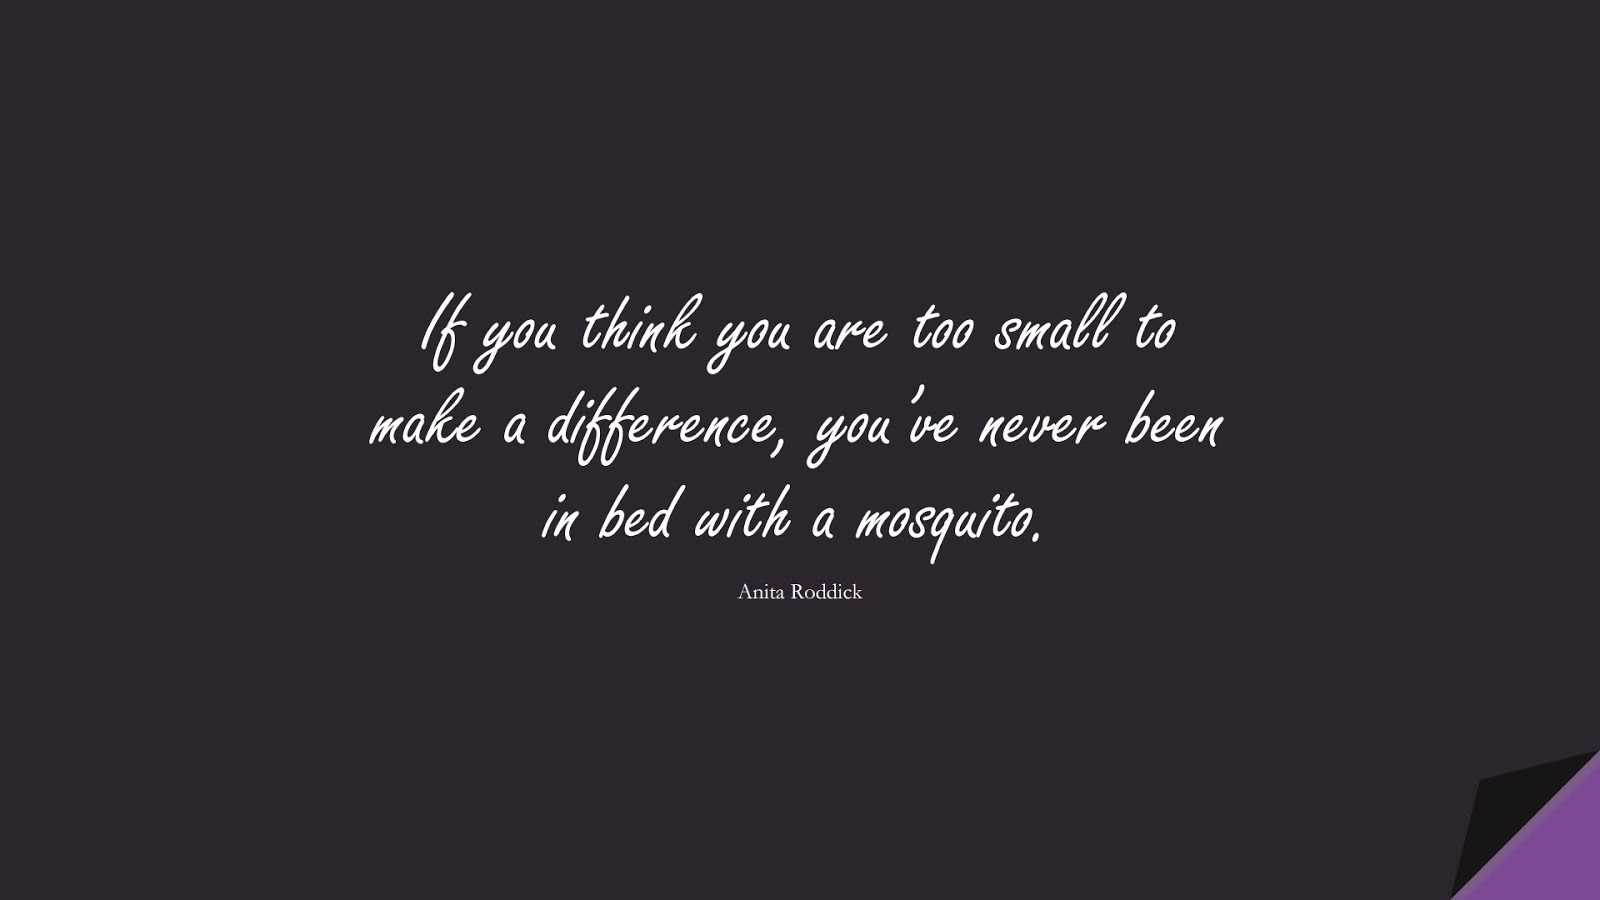 If you think you are too small to make a difference, you’ve never been in bed with a mosquito. (Anita Roddick);  #InspirationalQuotes